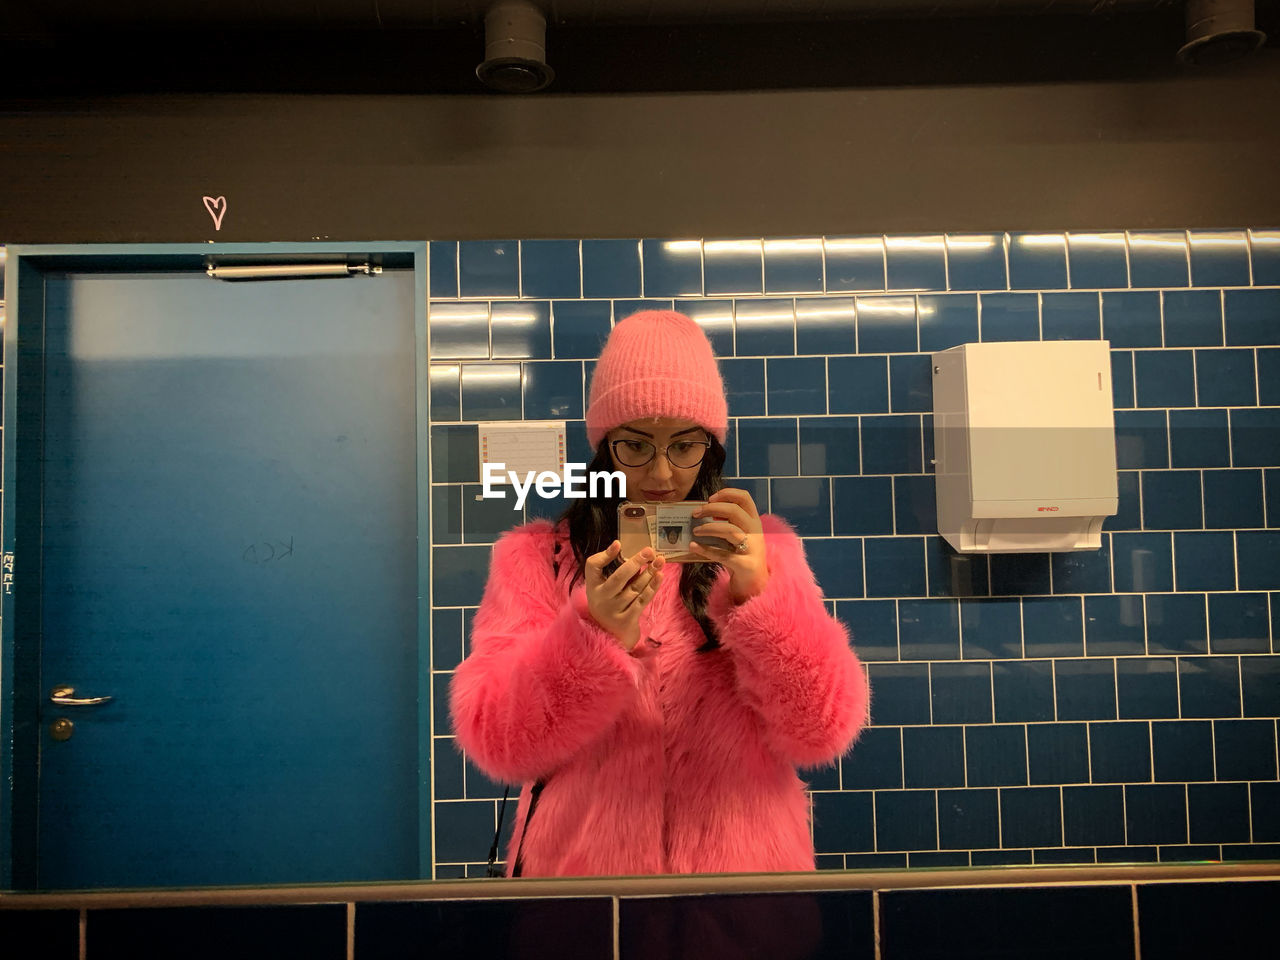 Woman photographing with smart phone while standing in bathroom